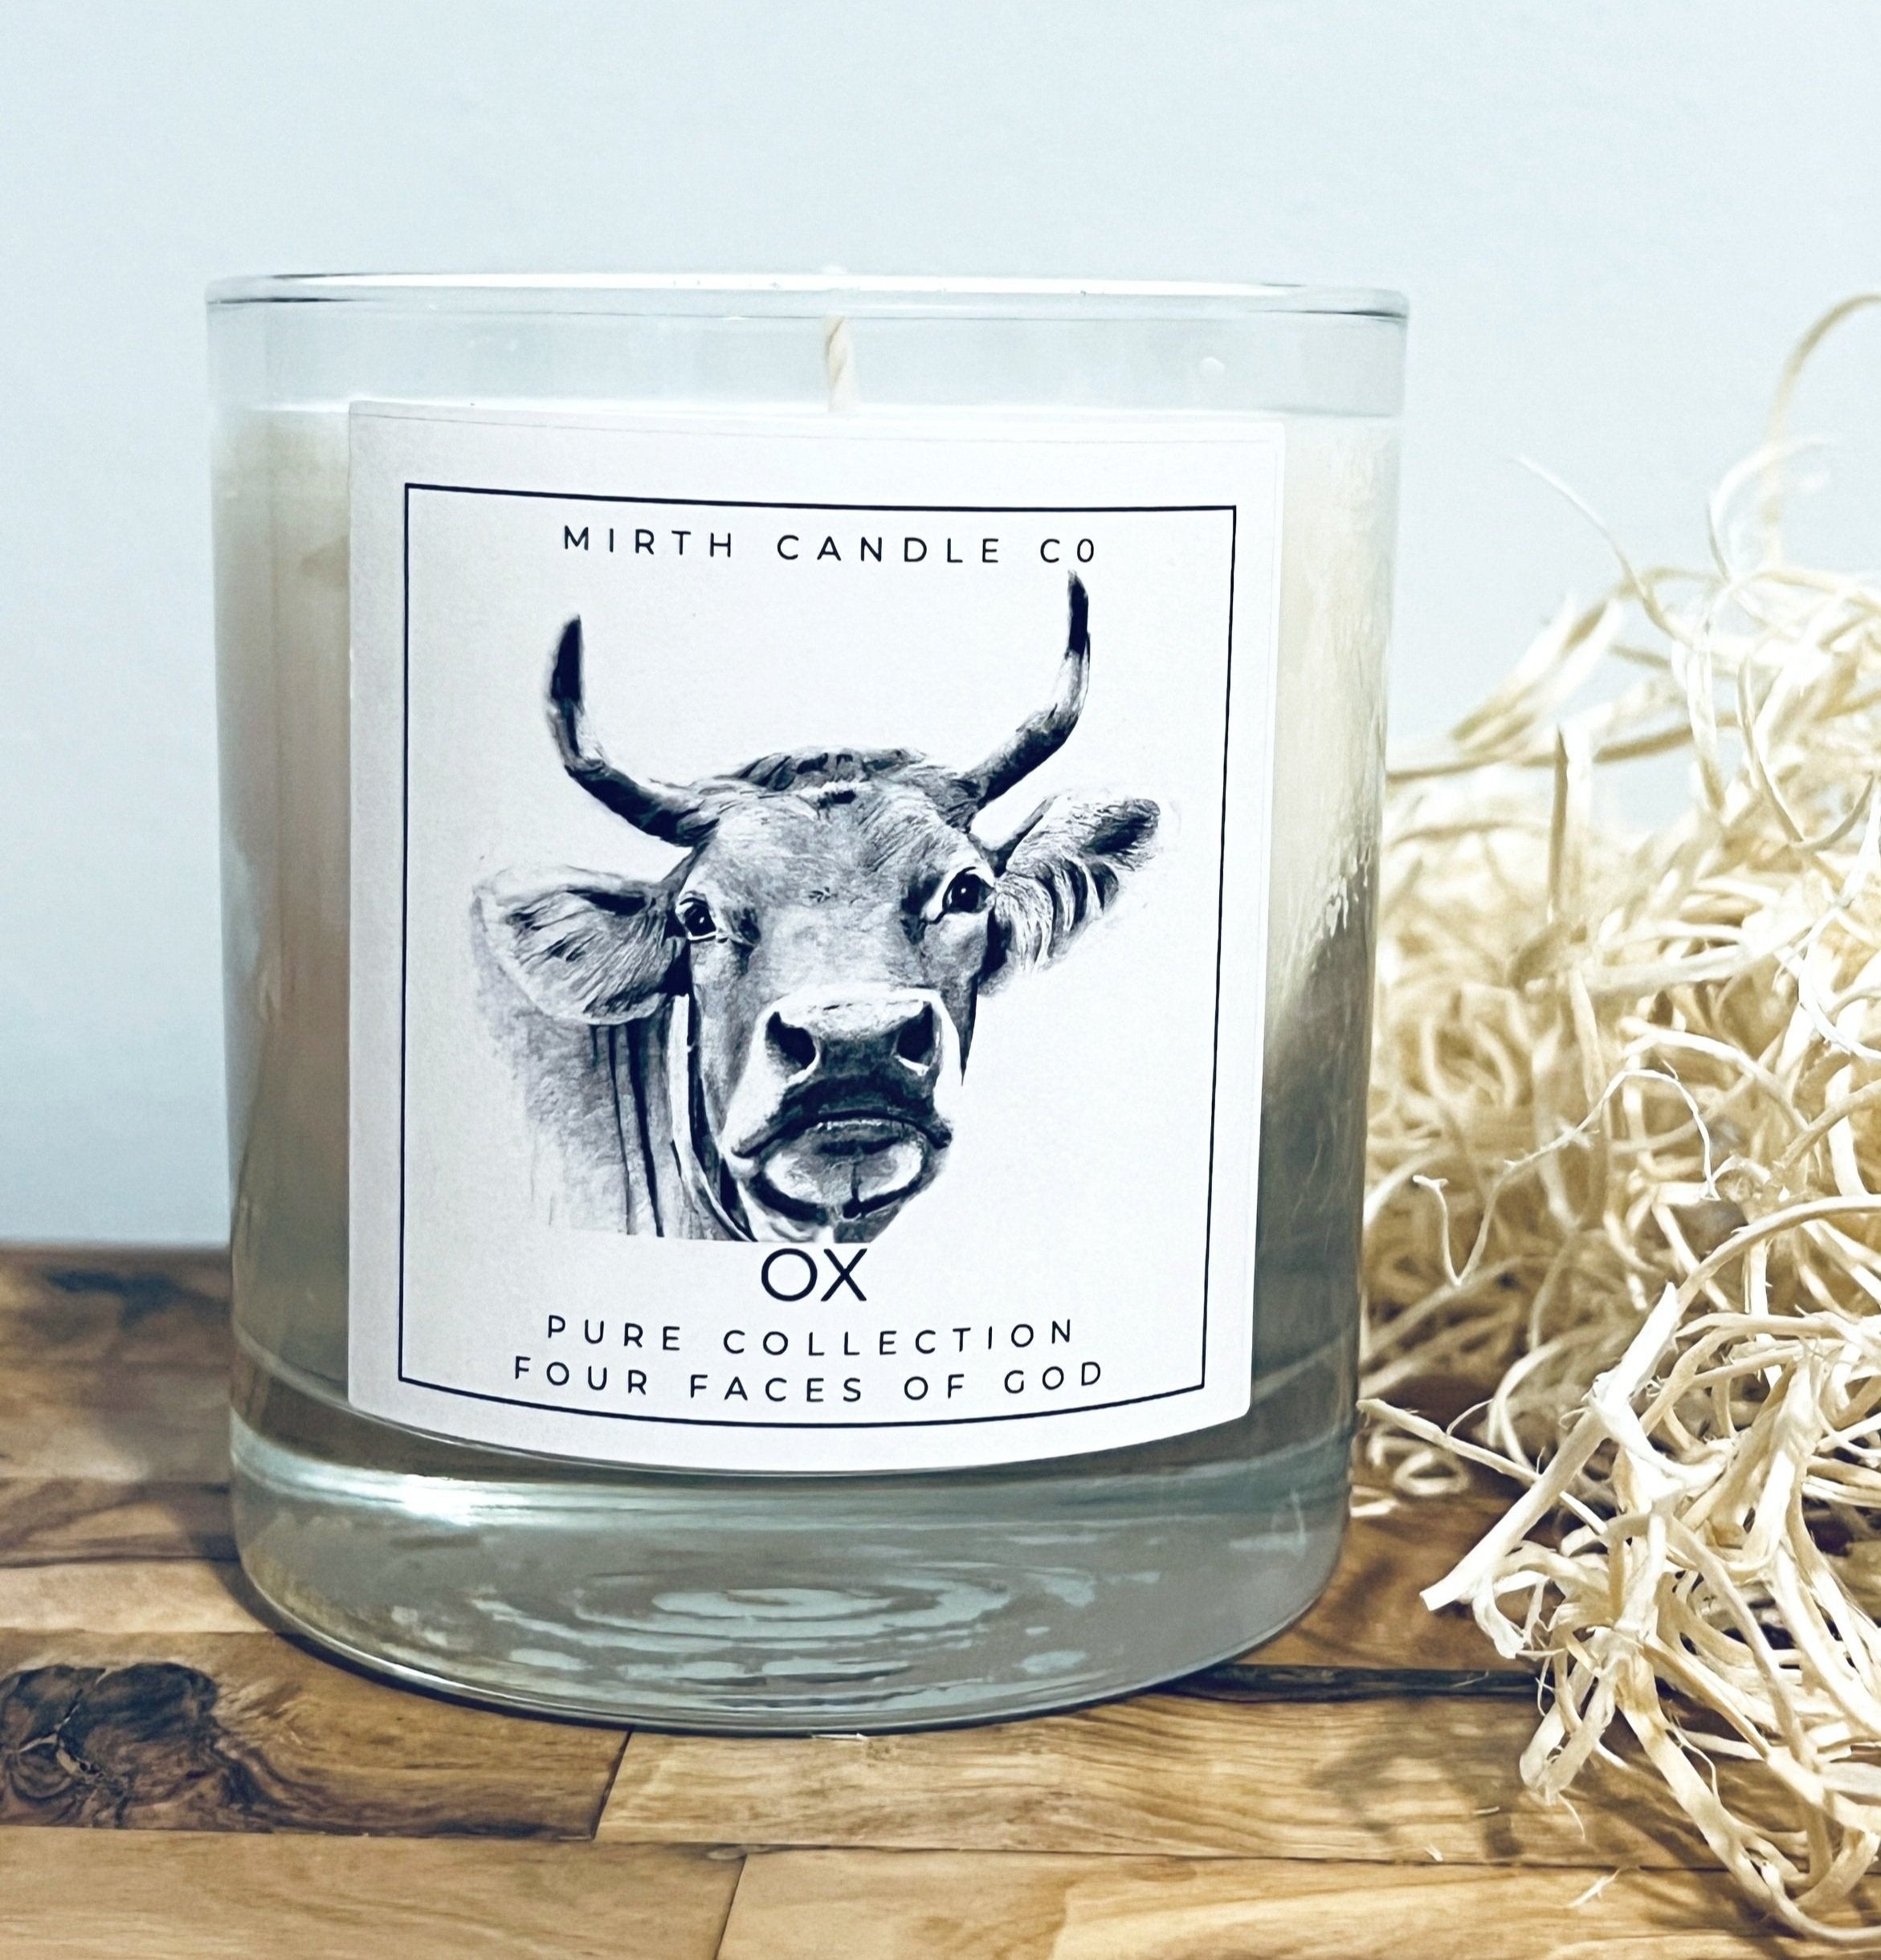 MIRTH CANDLE CO